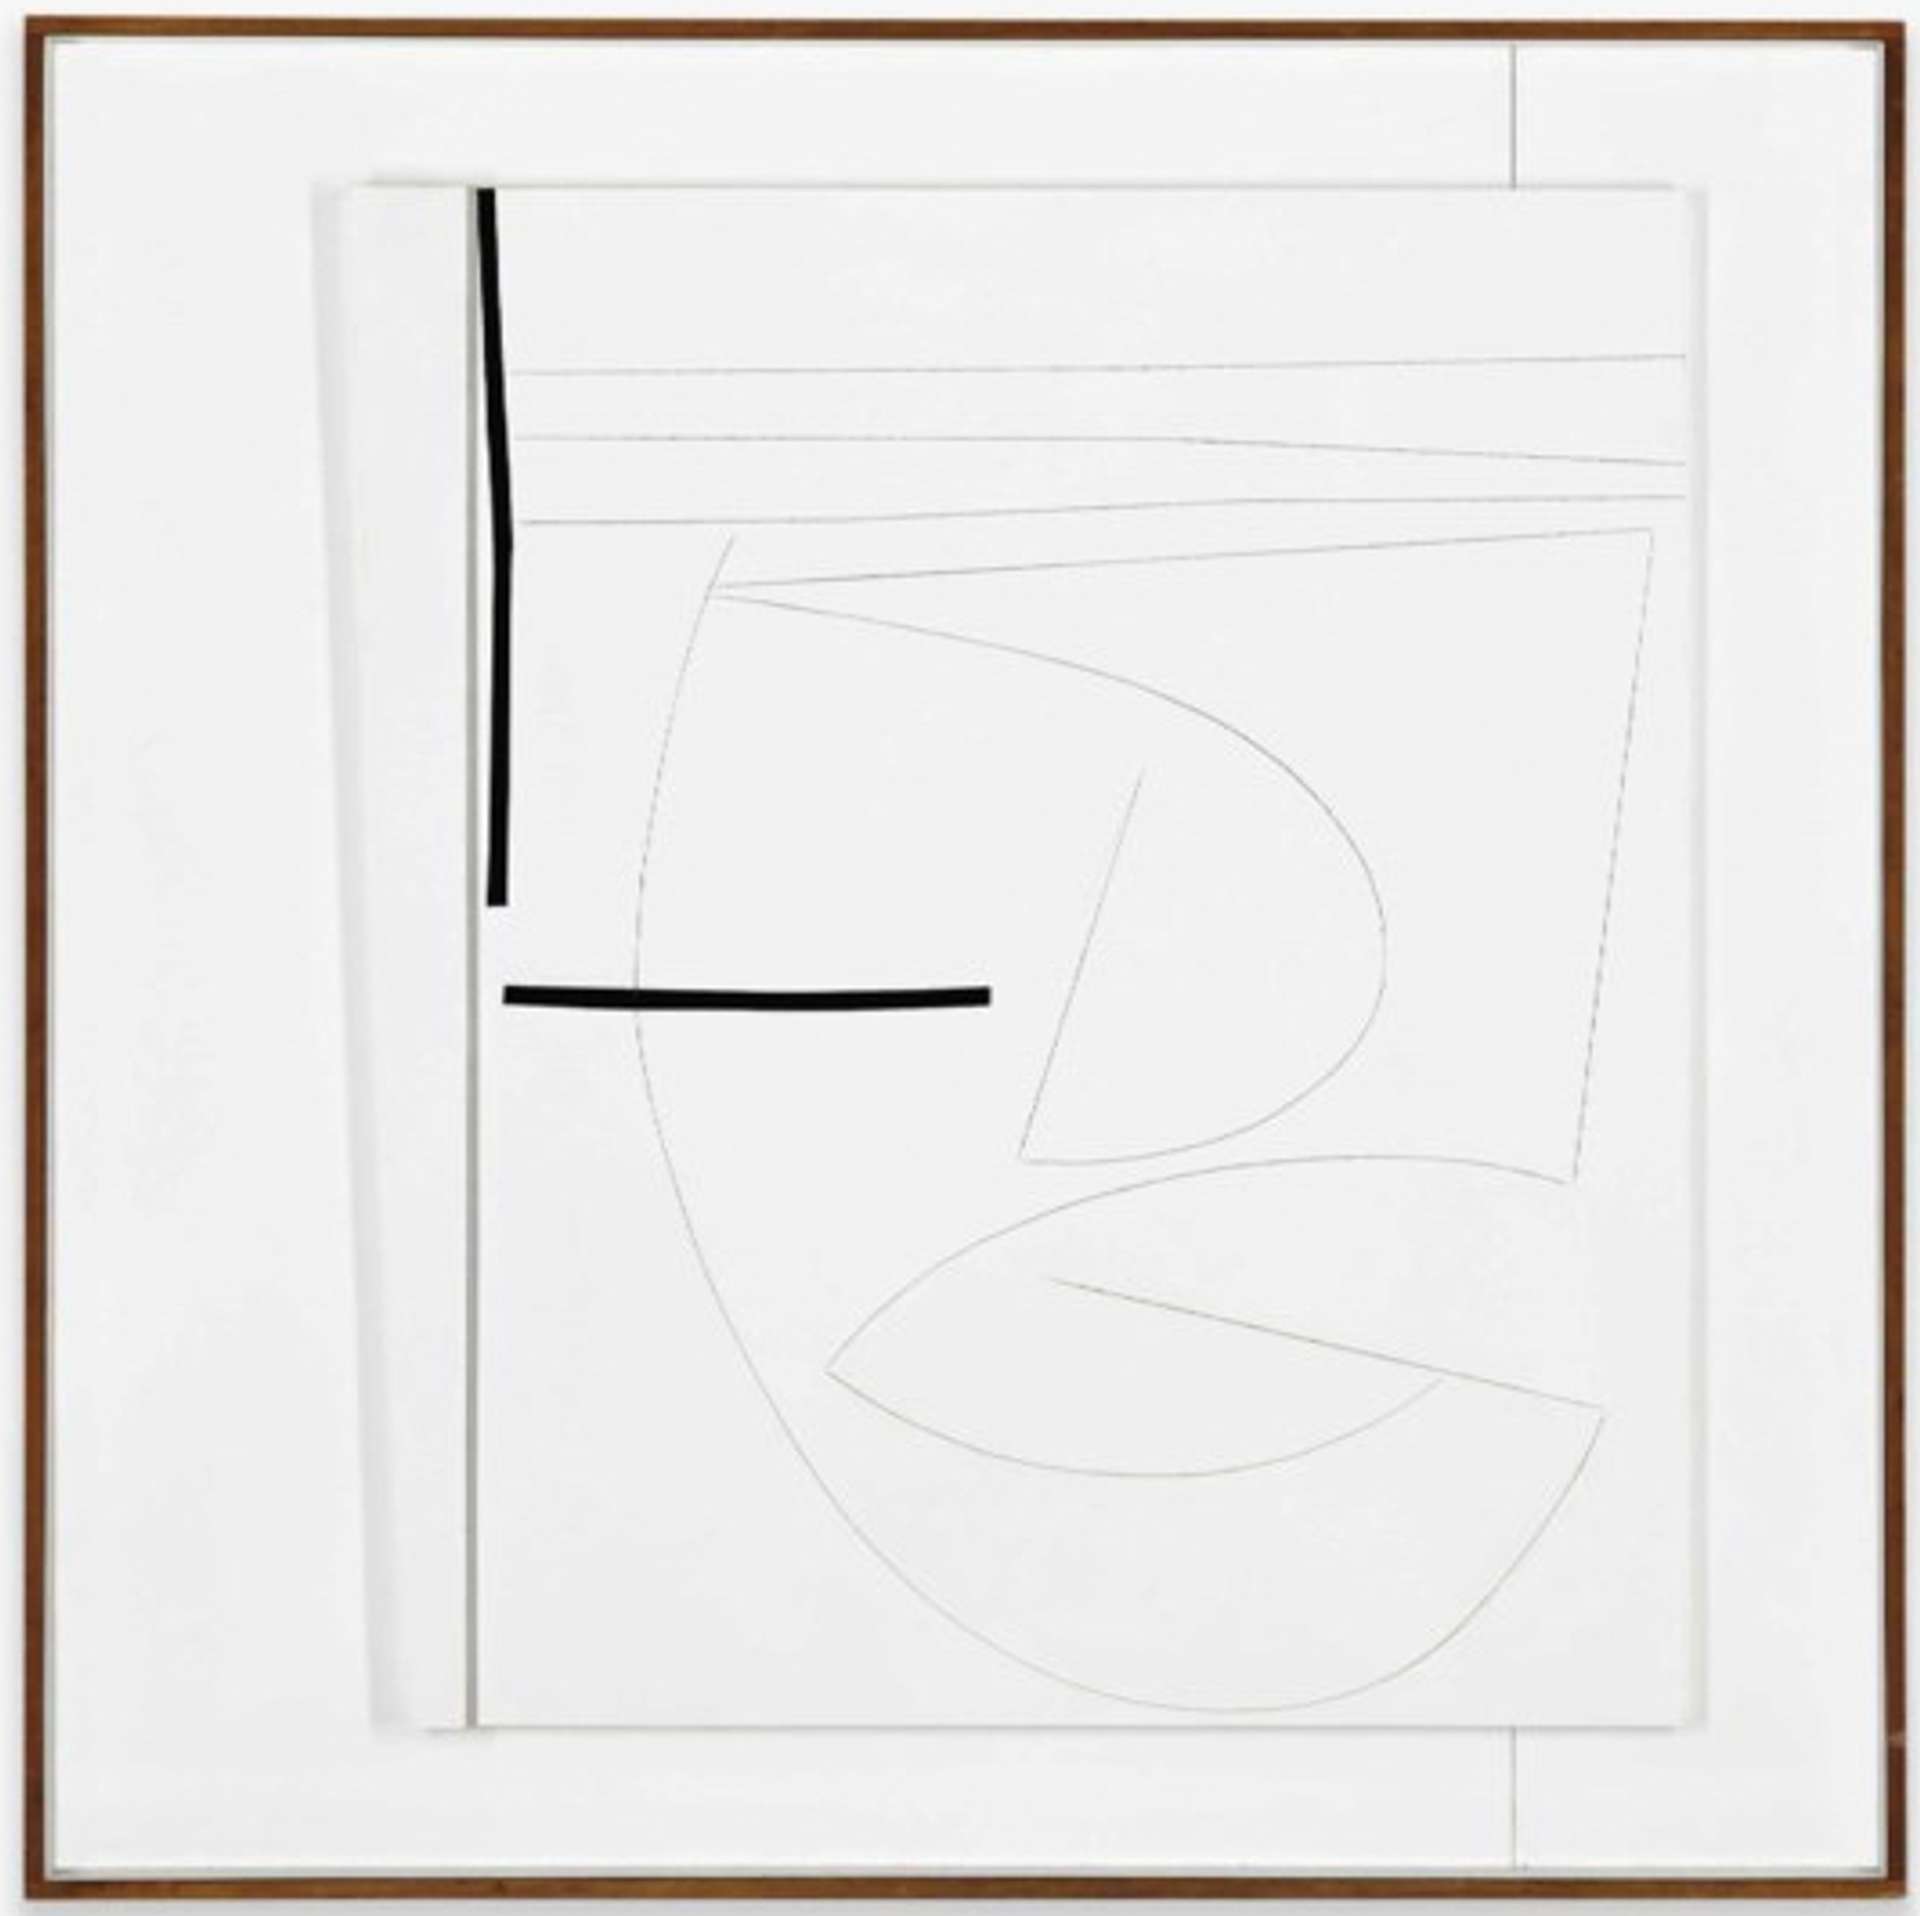 A white square canvas with delicate black lines forming a central square and various abstract shapes within it.